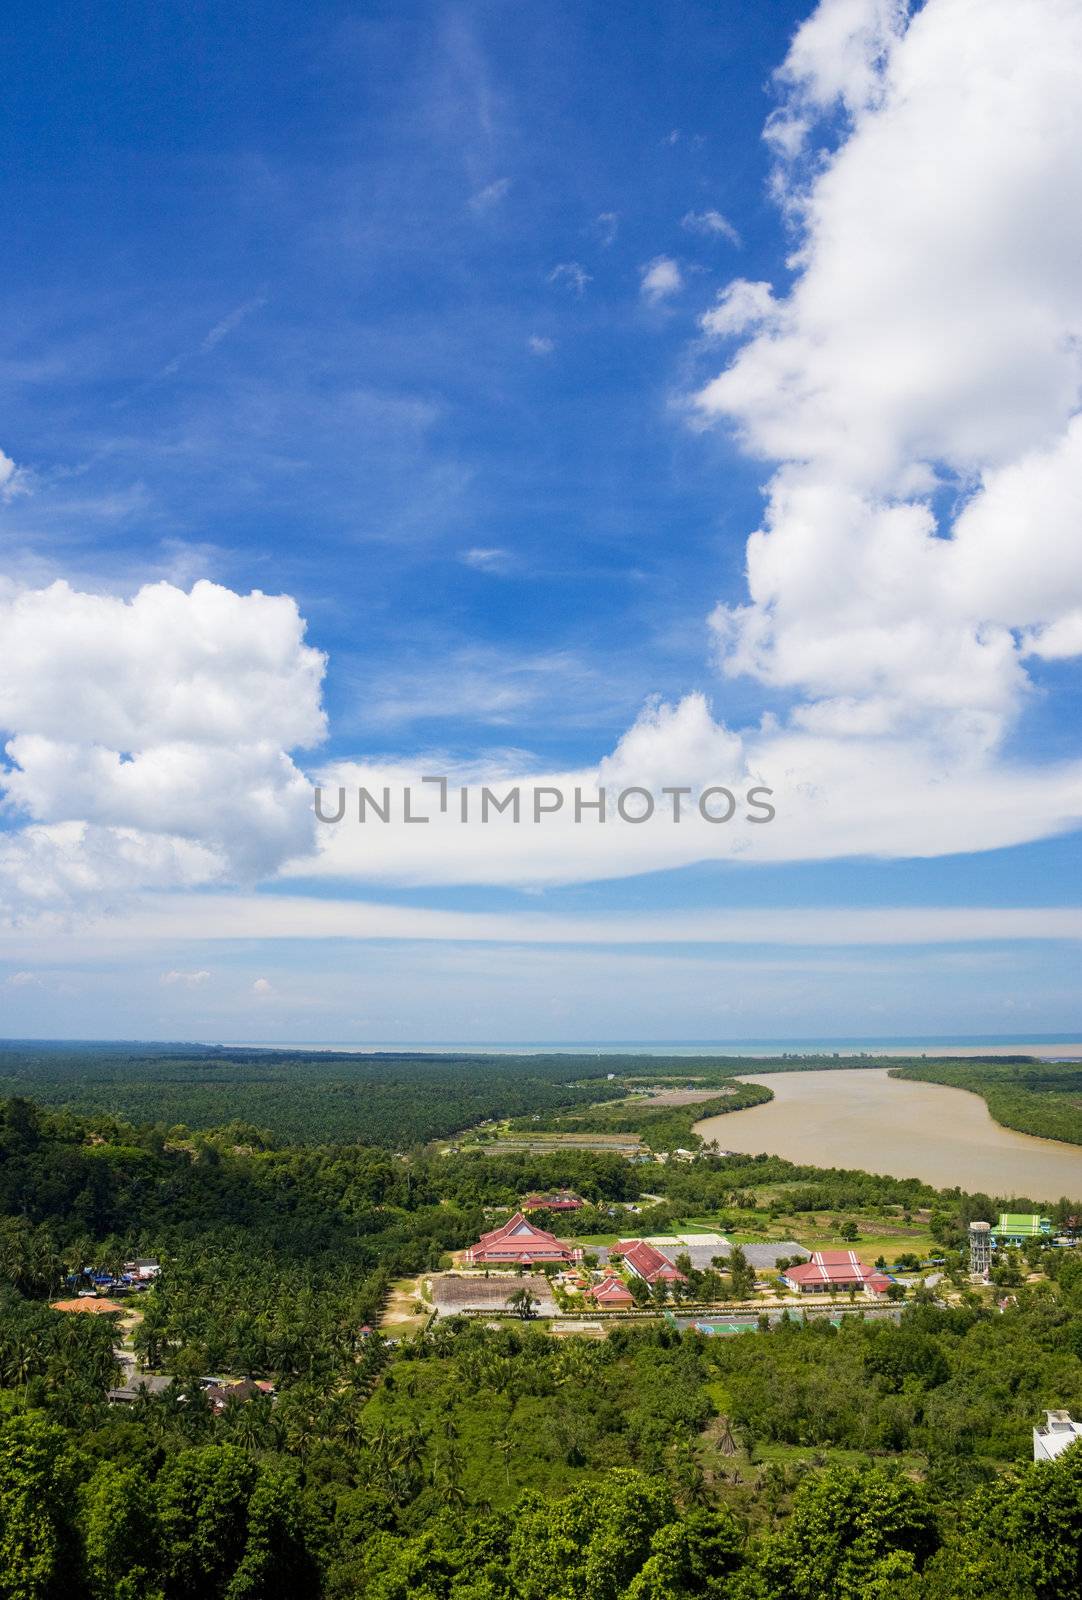 Image of Jugra River and Starits of Malacca as seen from Jugra Hill, Selangor, Malaysia.